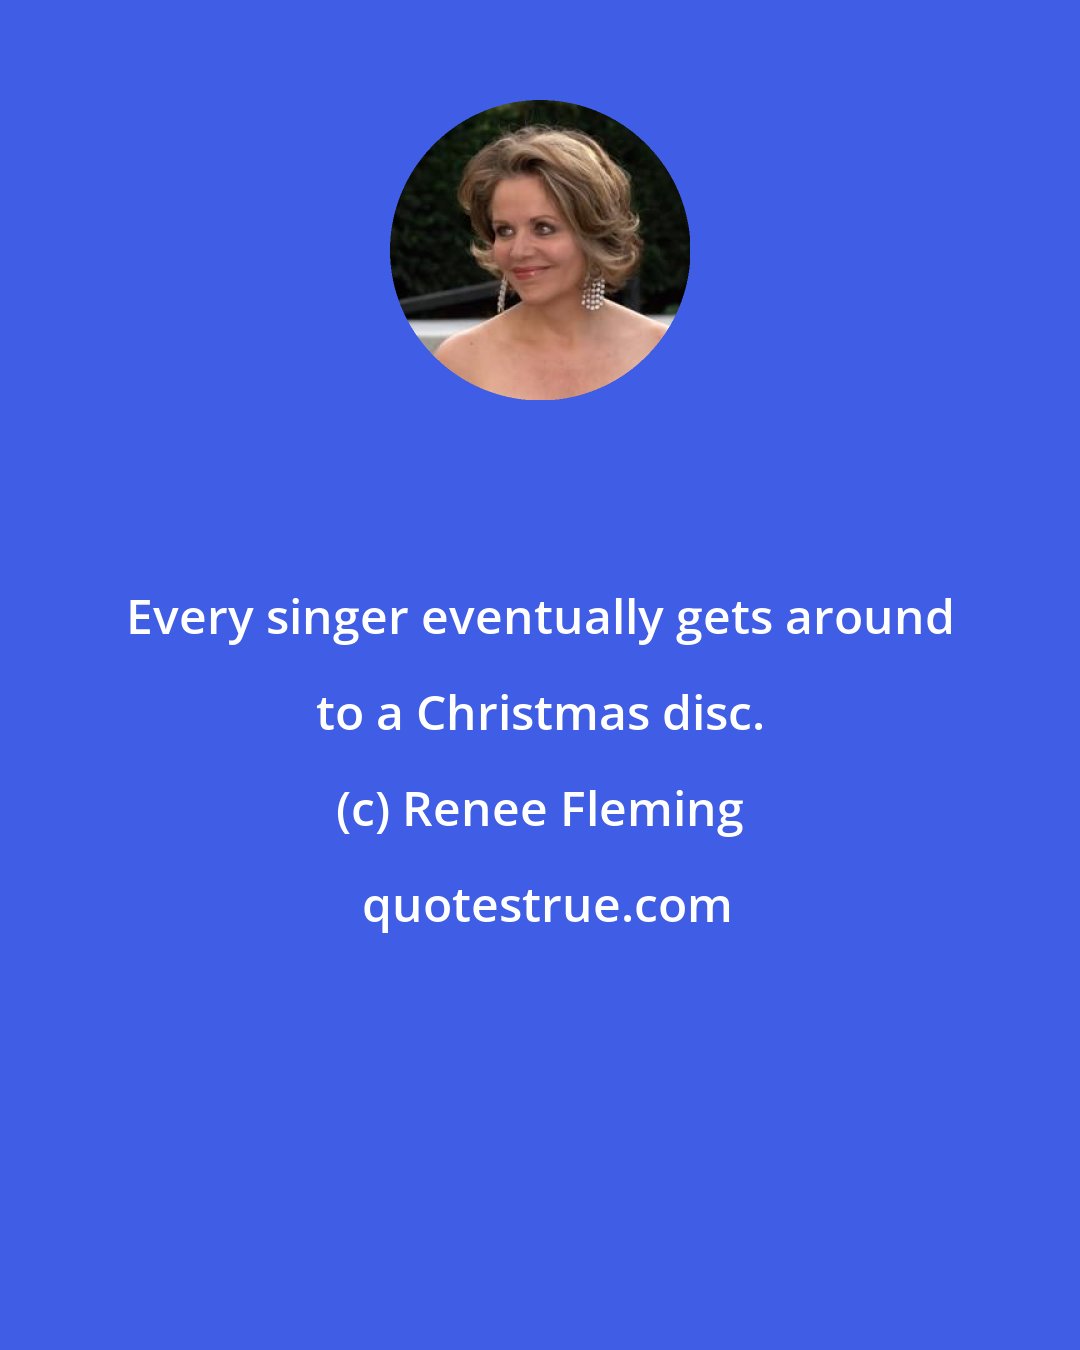 Renee Fleming: Every singer eventually gets around to a Christmas disc.